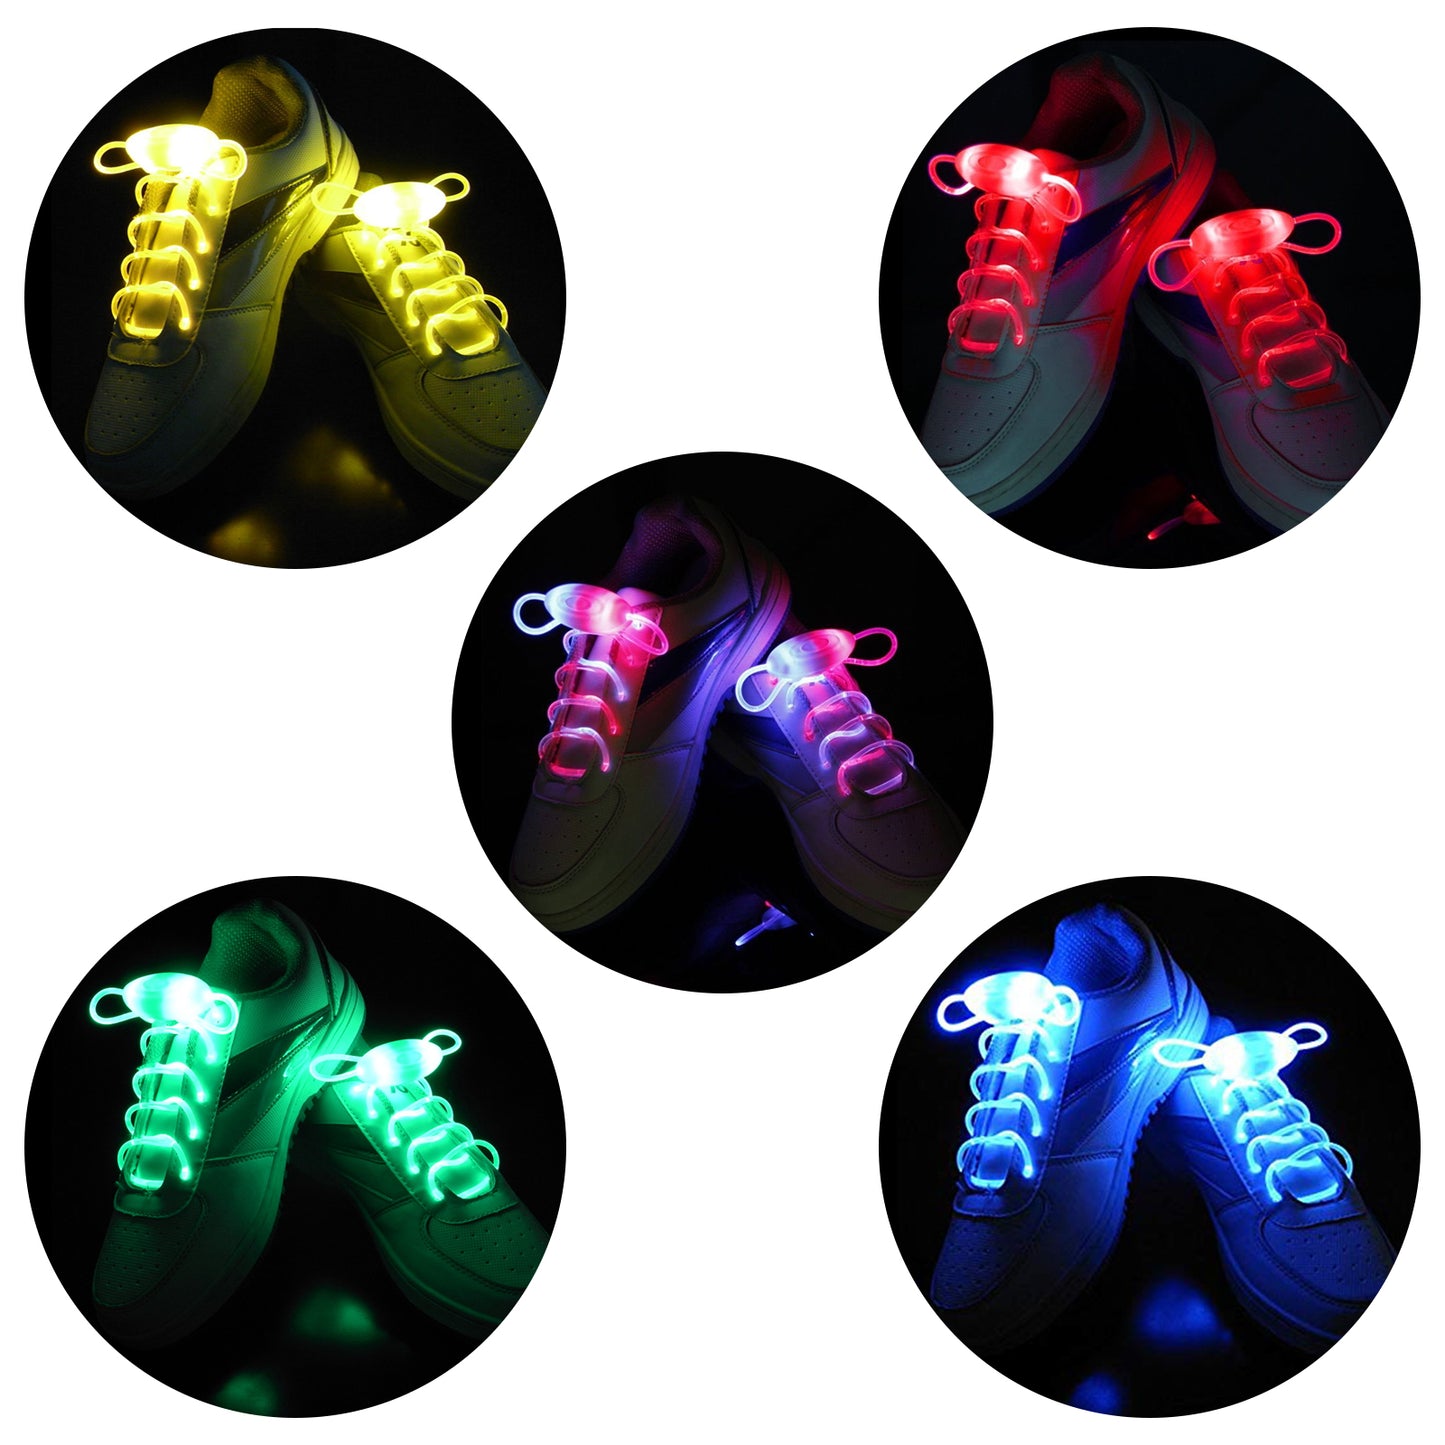 2win2buy 5 Pairs LED Light Up Shoelaces Casual Sneaker Waterproof Plastic Shoe Strings Halloween Christmas Party Disco Dancing Hip Pop Running Decorations Glow up Necessaries